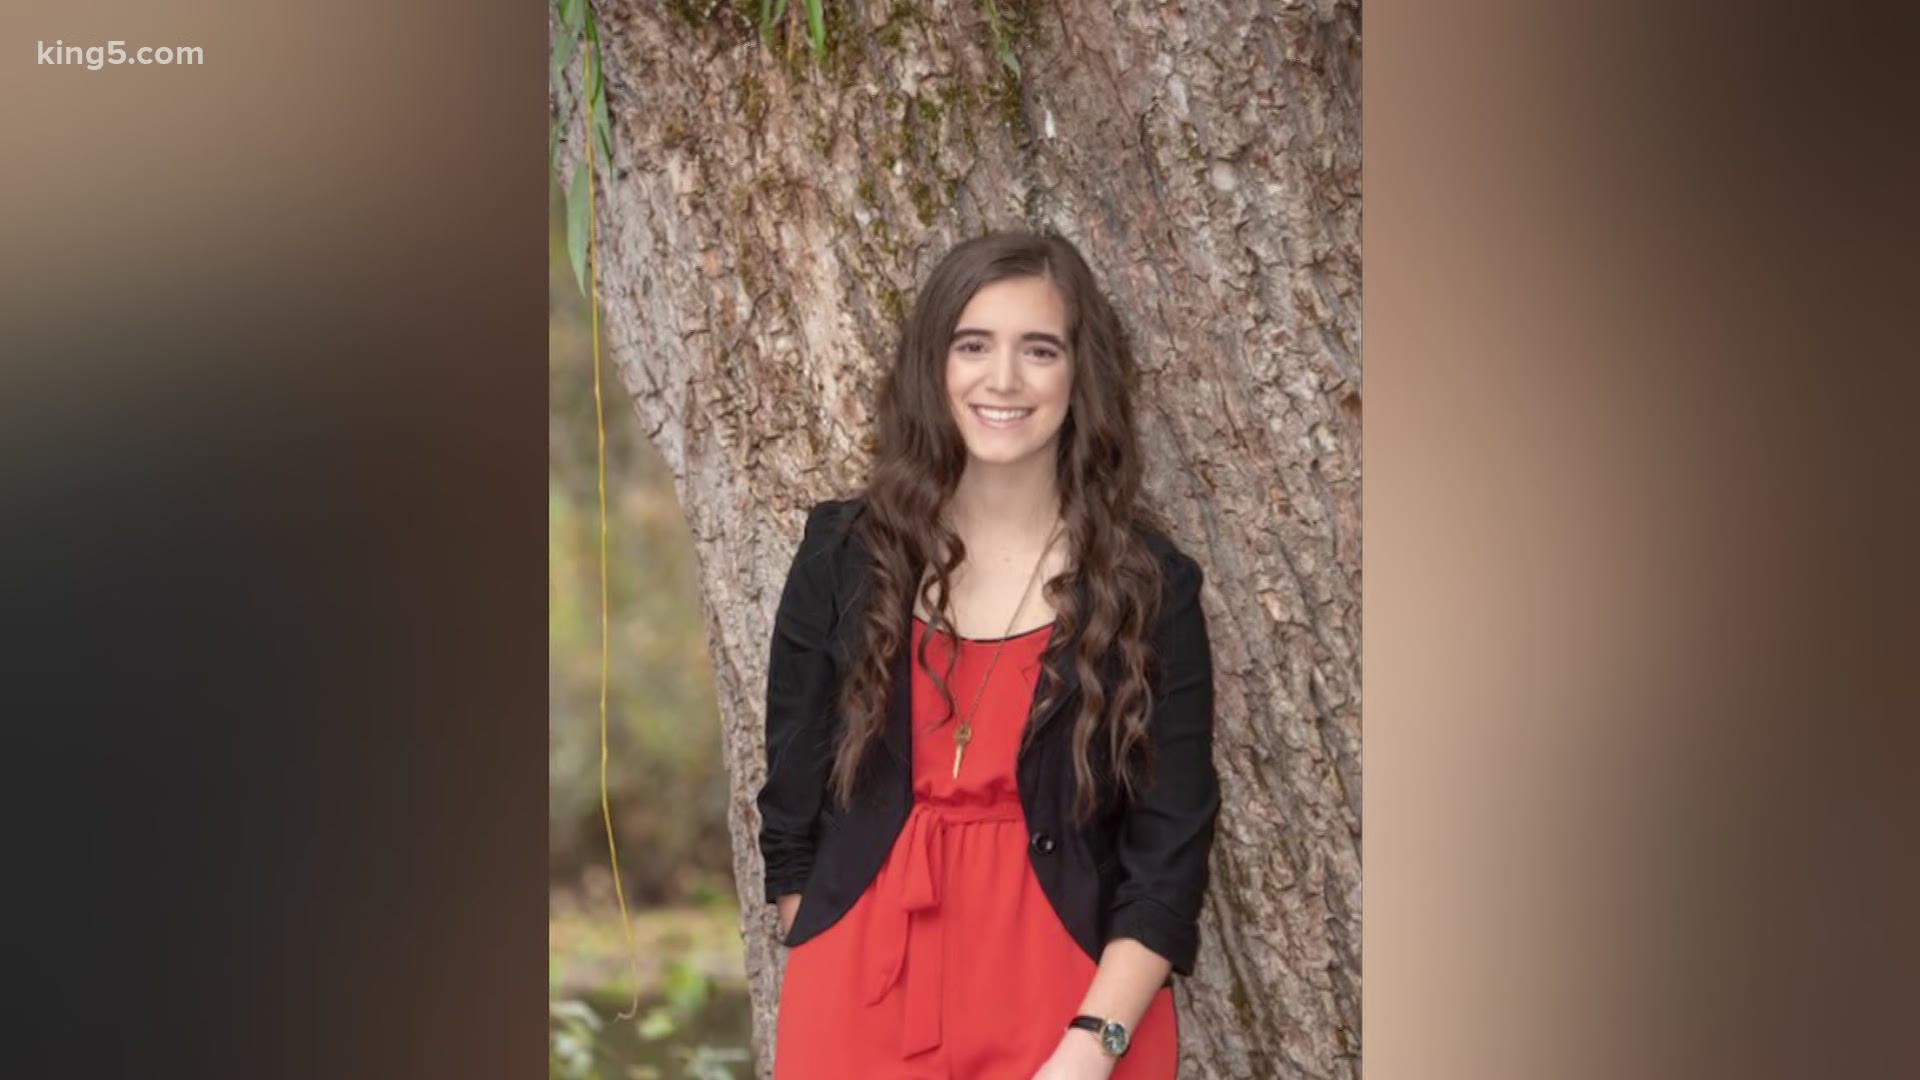 The King County Sheriff's Office says Gia Fuda was found alive nine days after she was reported missing near Stevens Pass.